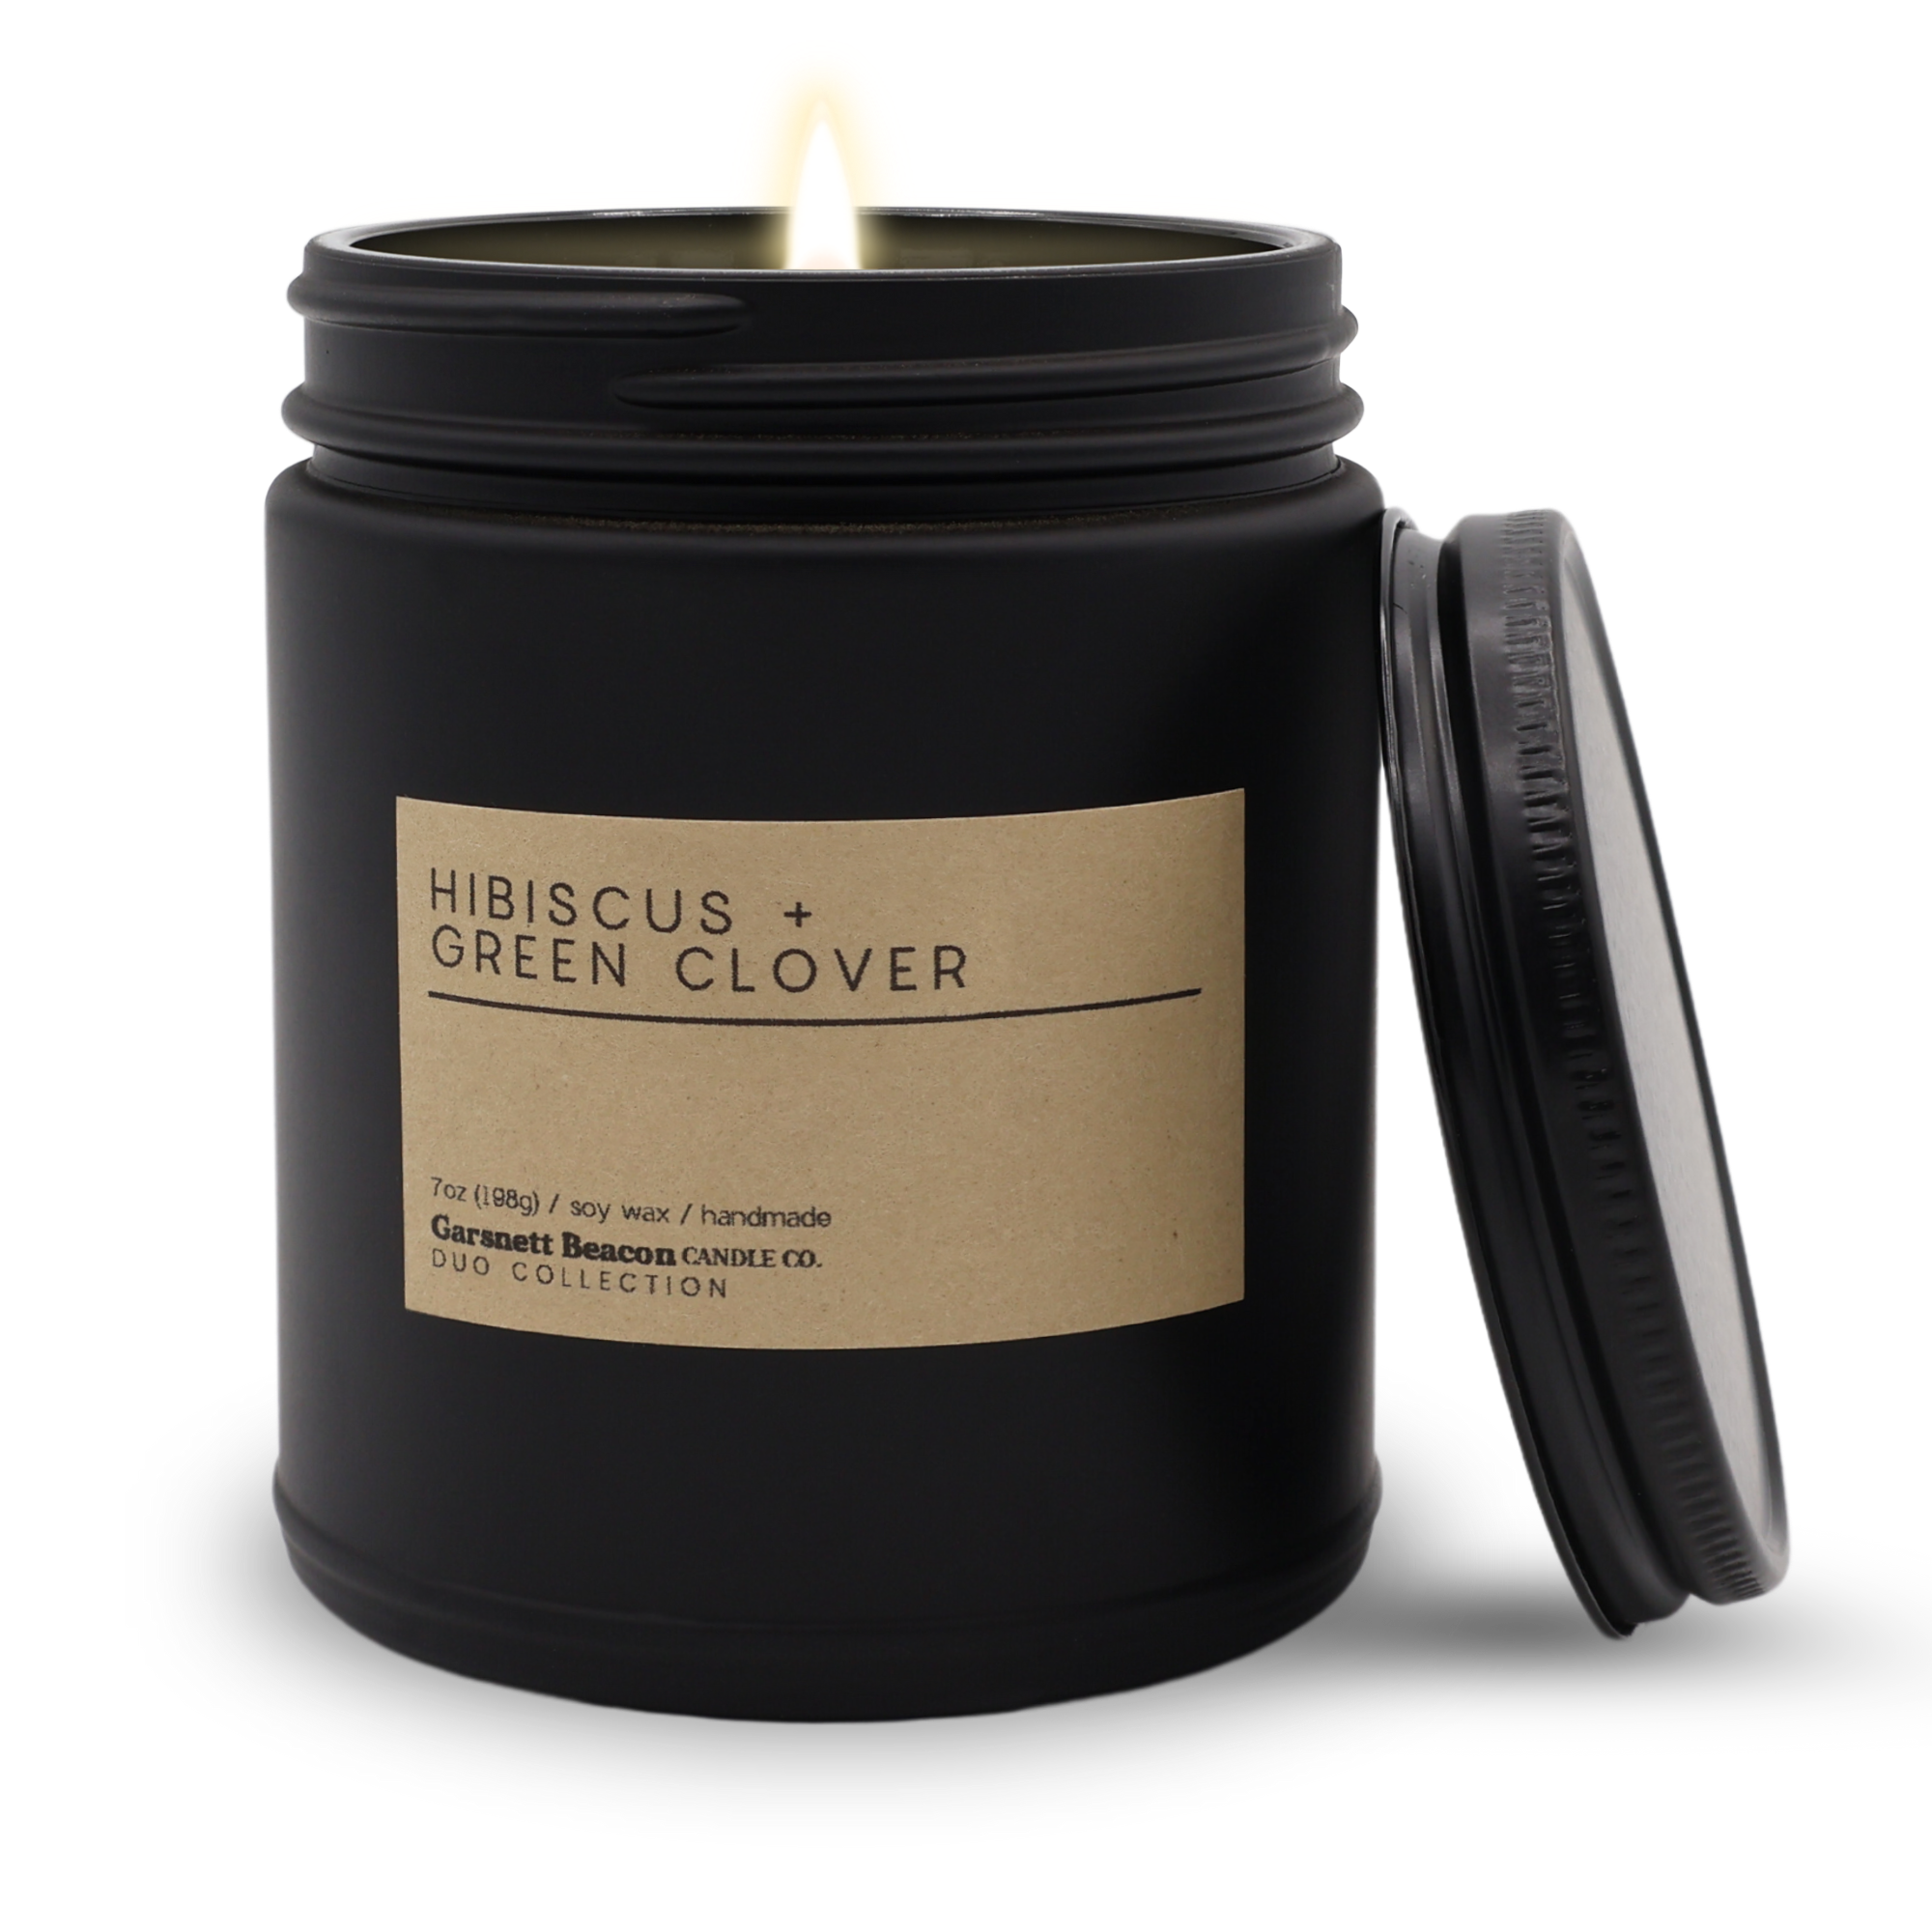 Hibiscus + Green Clover Luxury Scented Candle